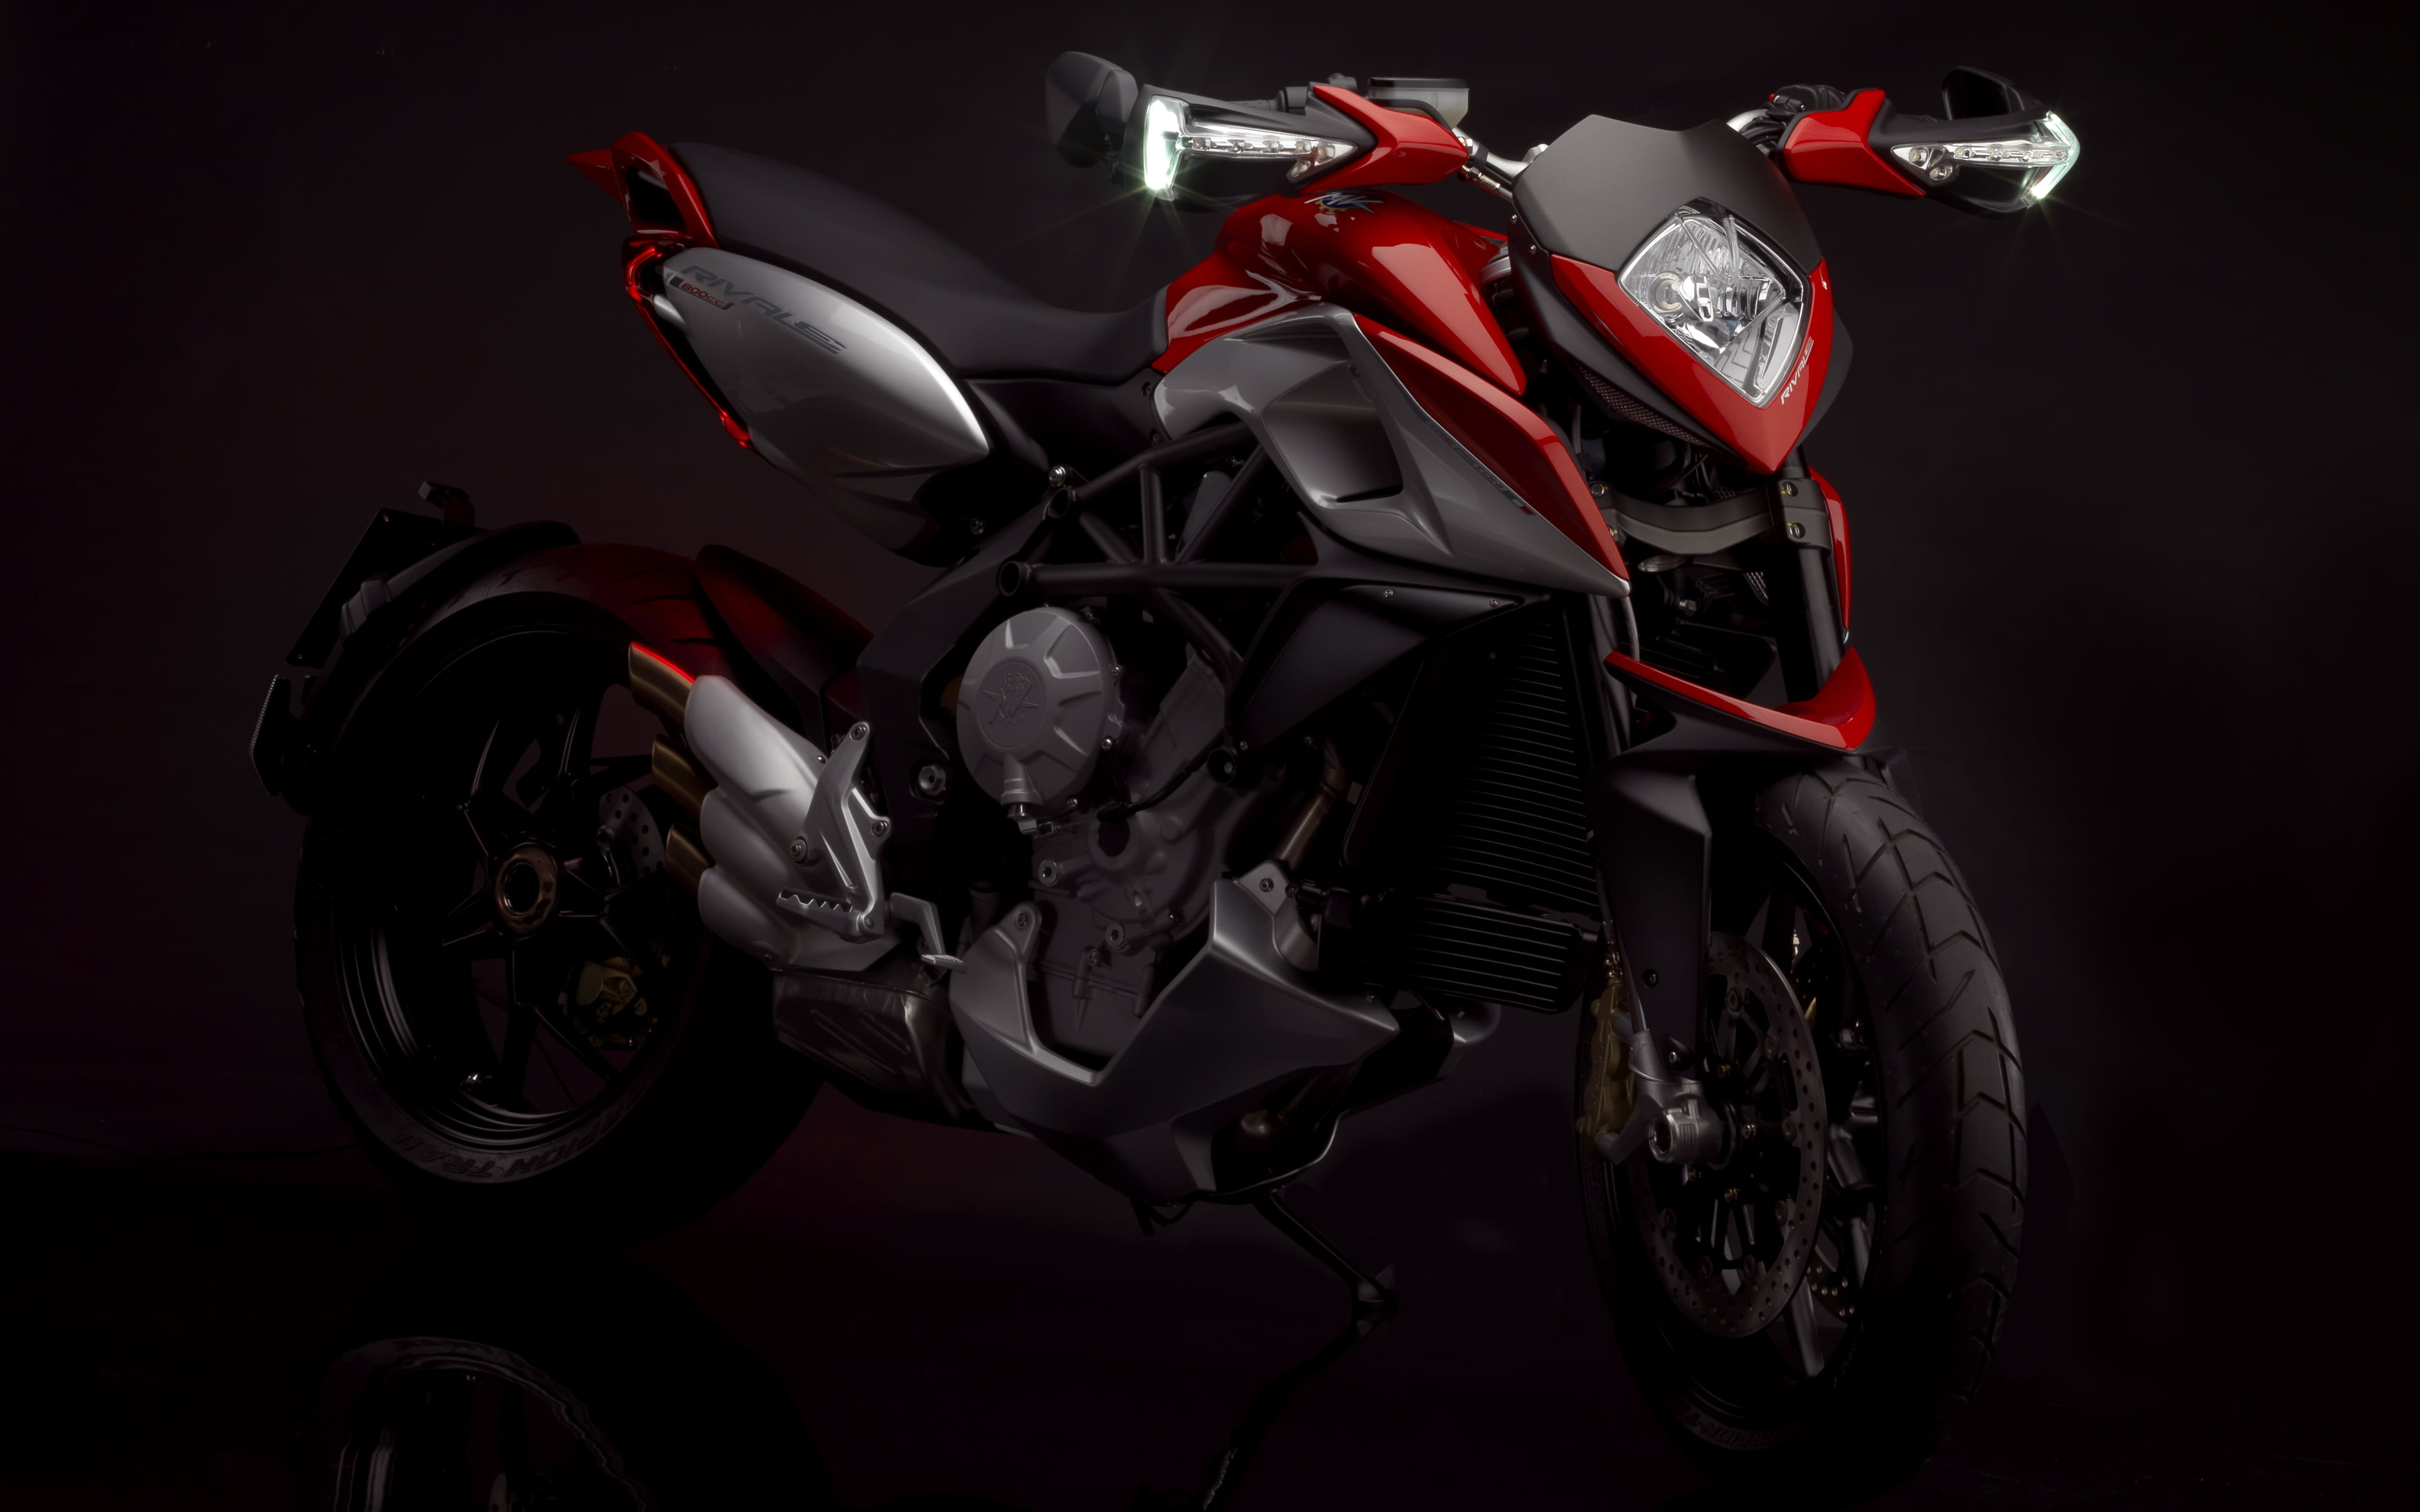 MV Agusta Rivale 800 First Look, red and black standard motorcycle